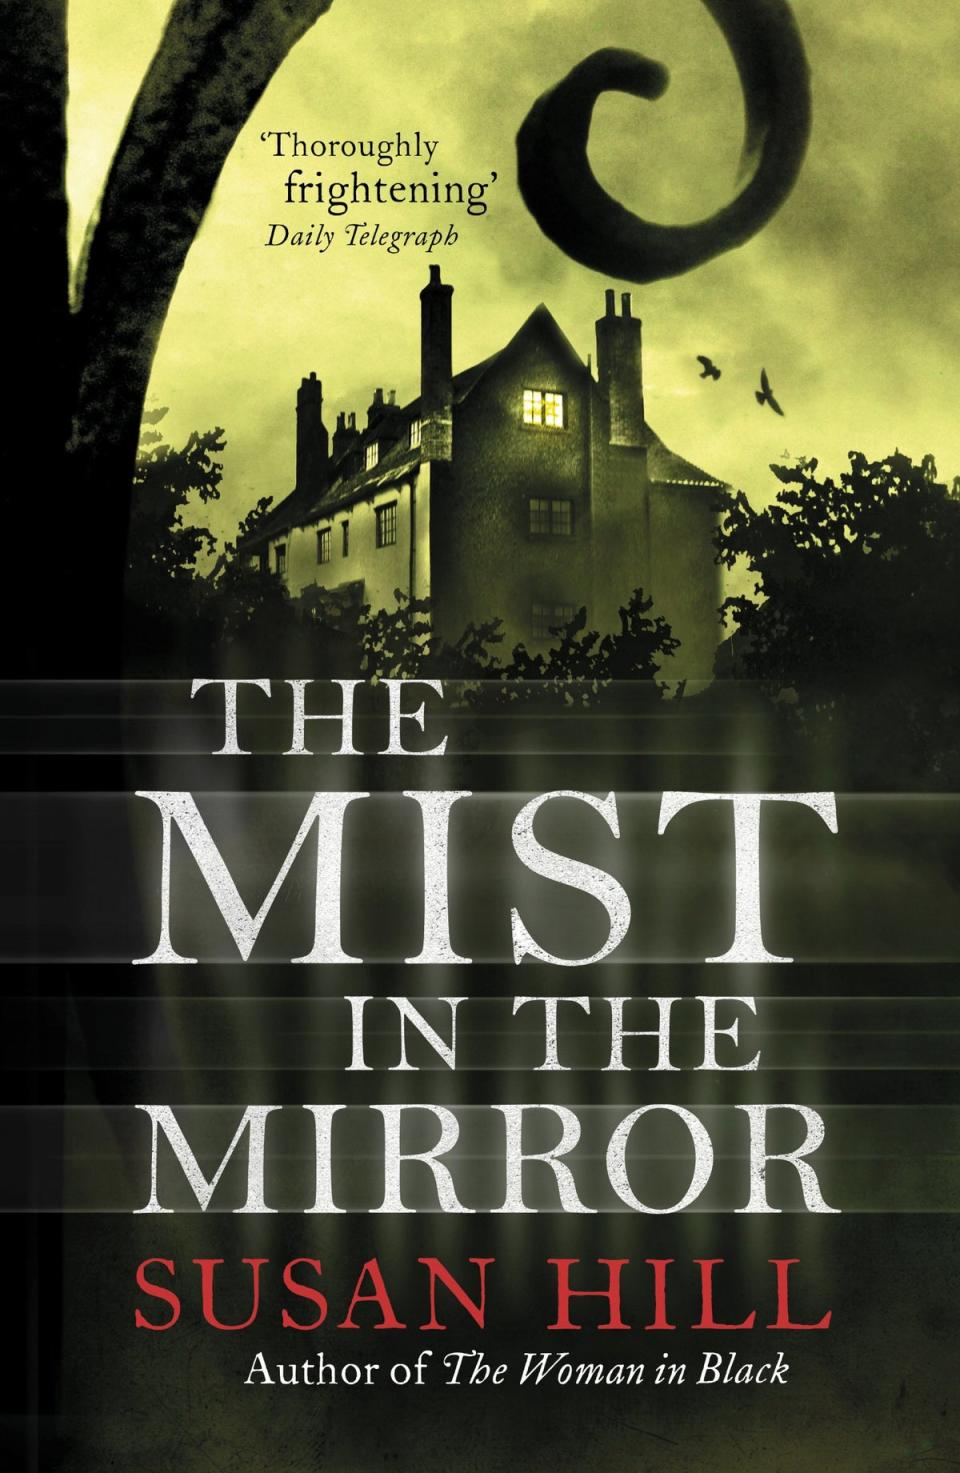 I remember gasping aloud at a particular twist in Susan Hill’s ‘The Mist in the Mirror’ (Handout)